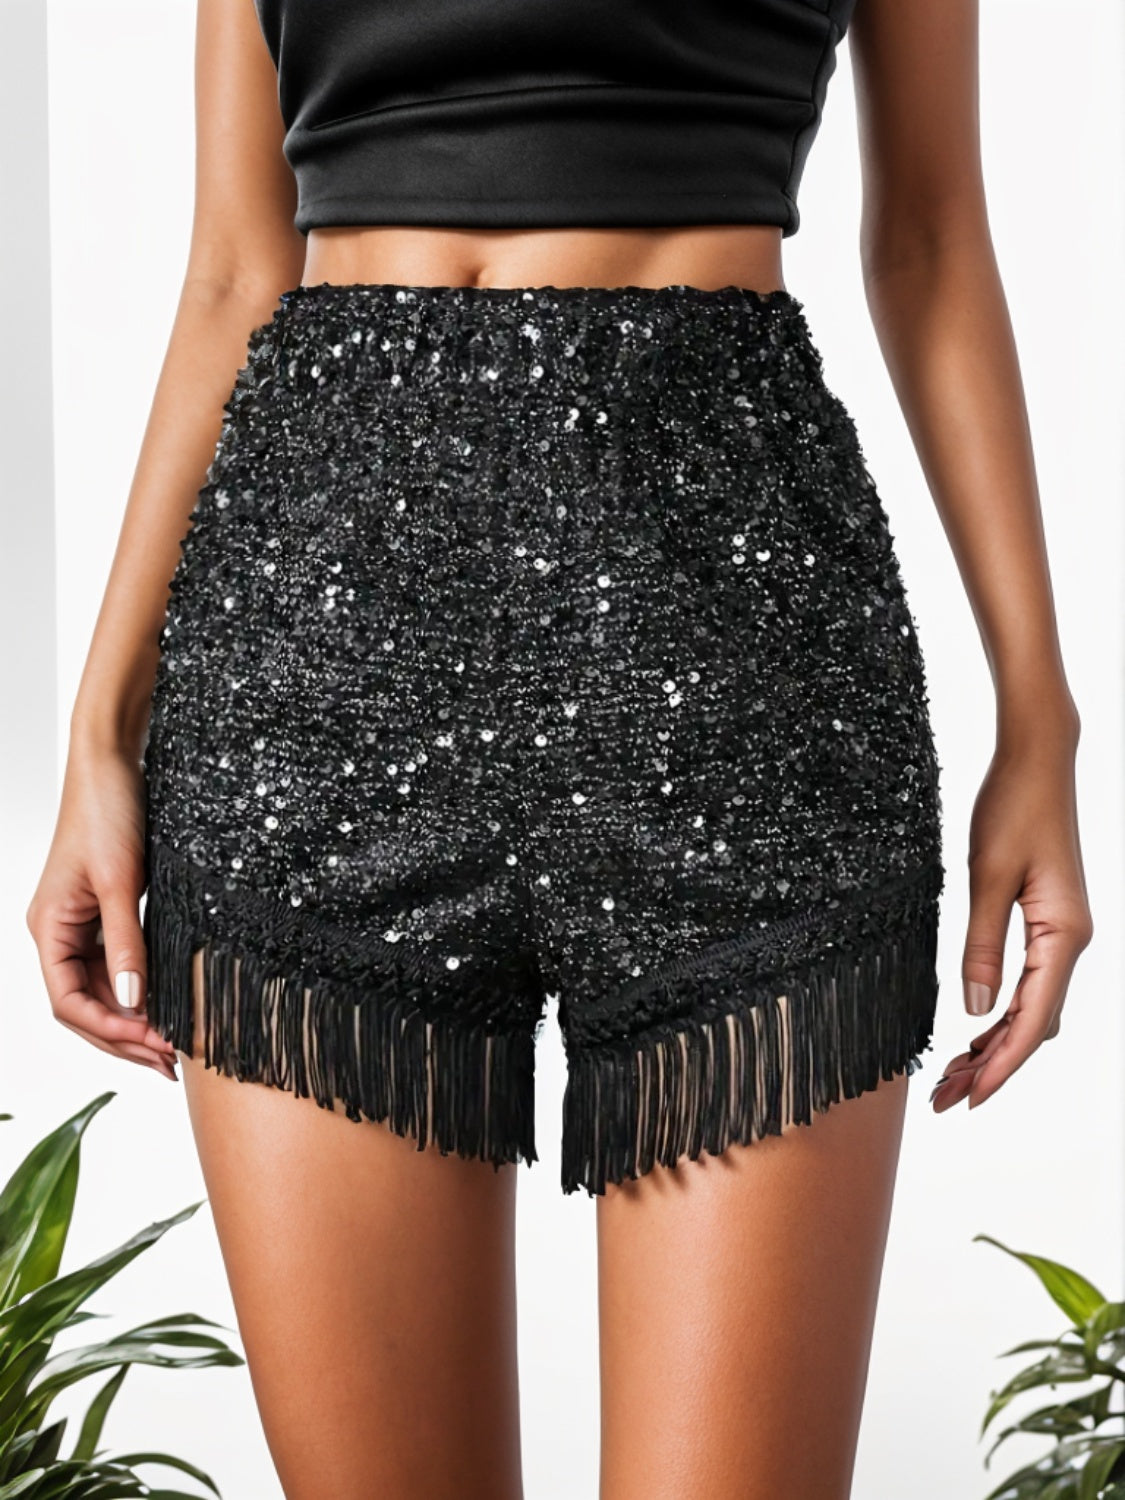 Dazzle in our Fringe Sequin Shorts, perfect for a standout look at parties or casual chic days.